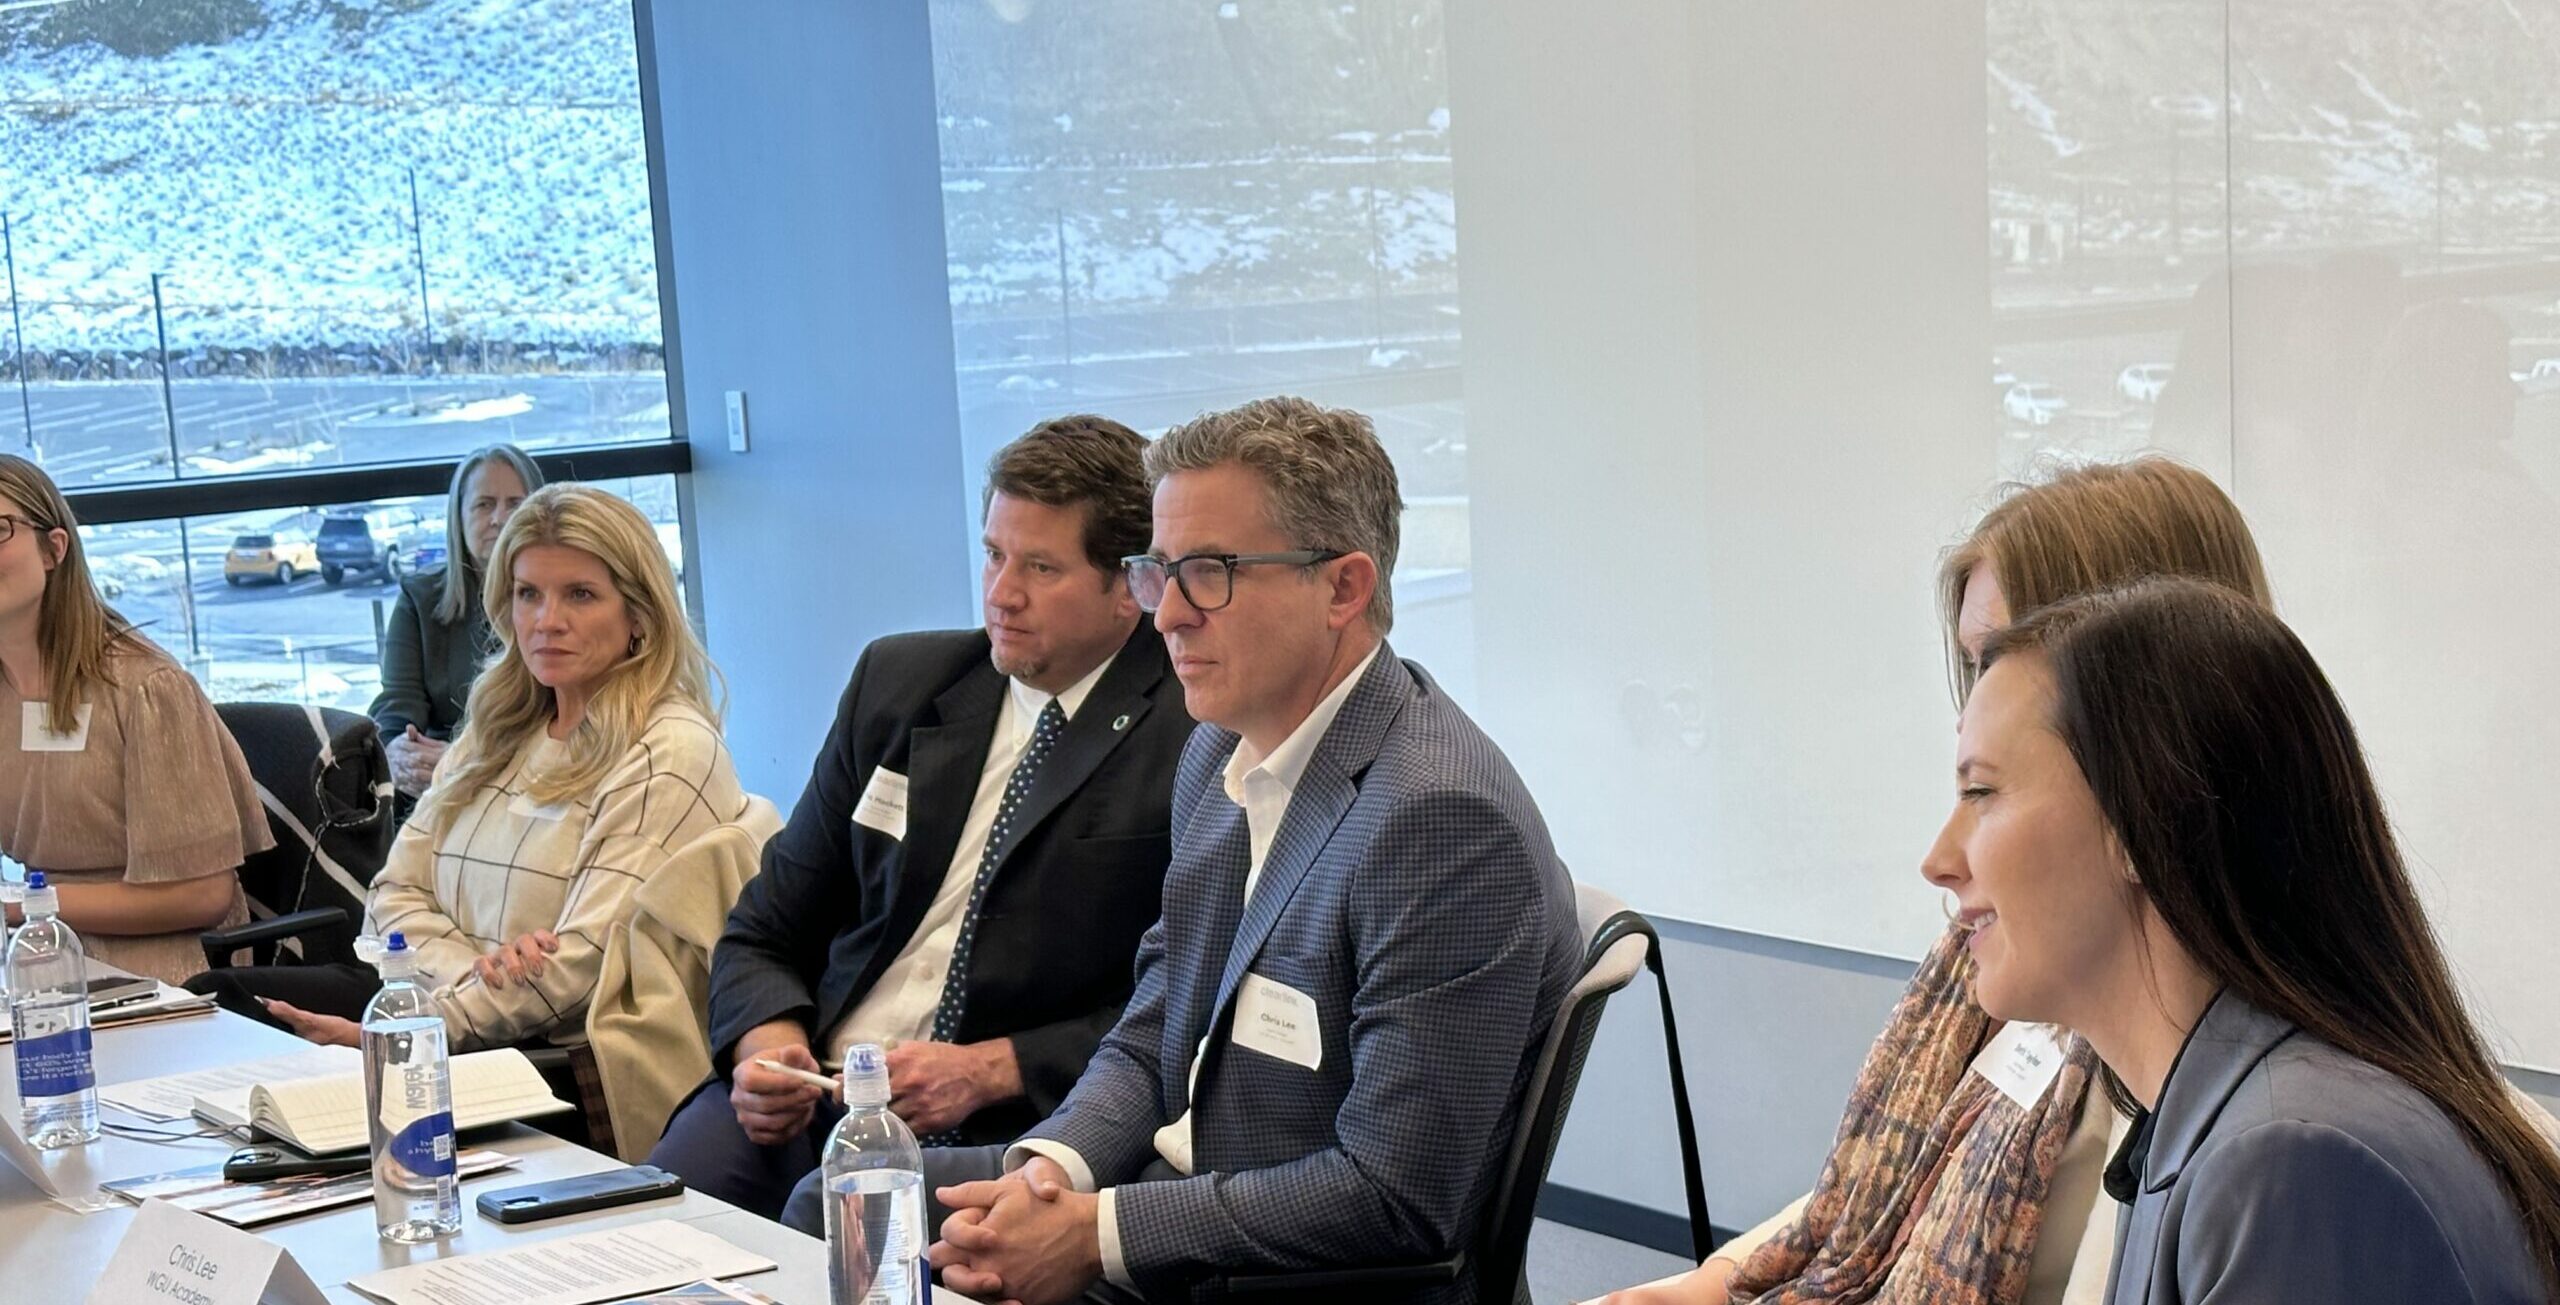 Last month, Utah Business partnered with Clearlink to host a roundtable on education in Utah.